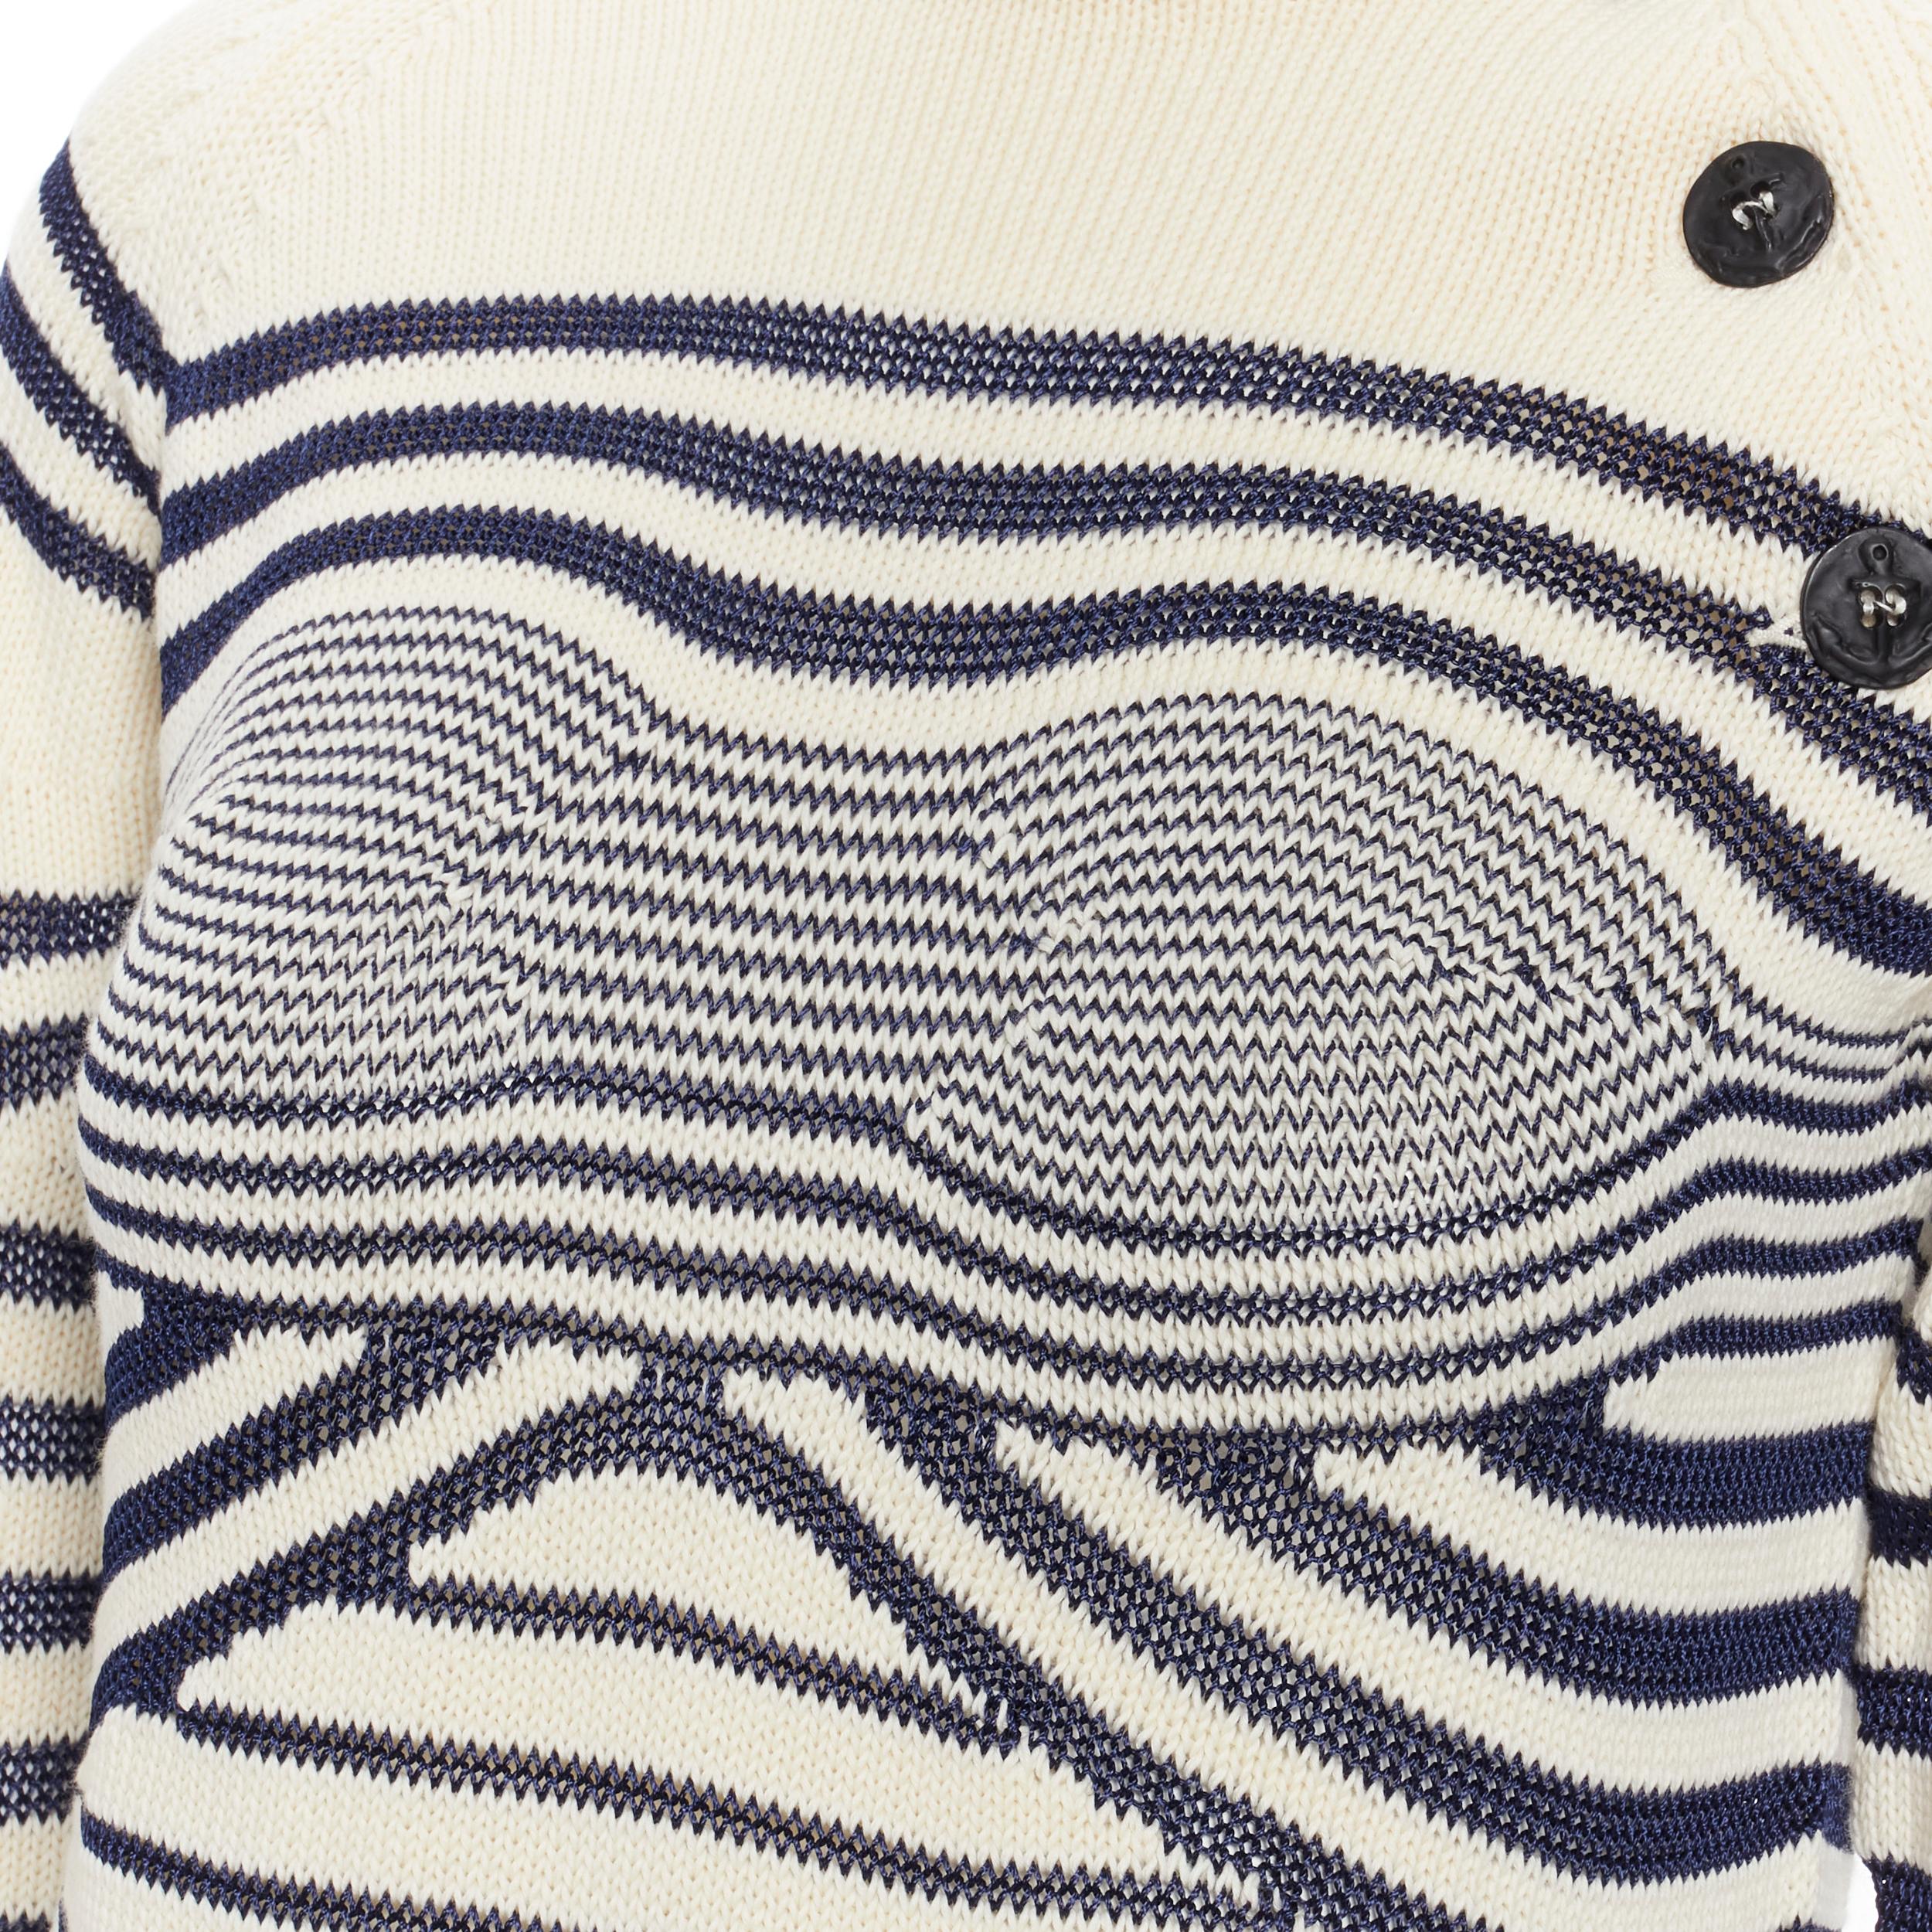 new JEAN PAUL GAULTIER vintage Cyber Baba optical stripe sailor sweater S 
Reference: TGAS/B01643 
Brand: Jean Paul Gaultier 
Material: Cotton 
Color: Multicolour 
Pattern: Striped 
Closure: Button 
Extra Detail: Cyber Baba collection. Cotton and